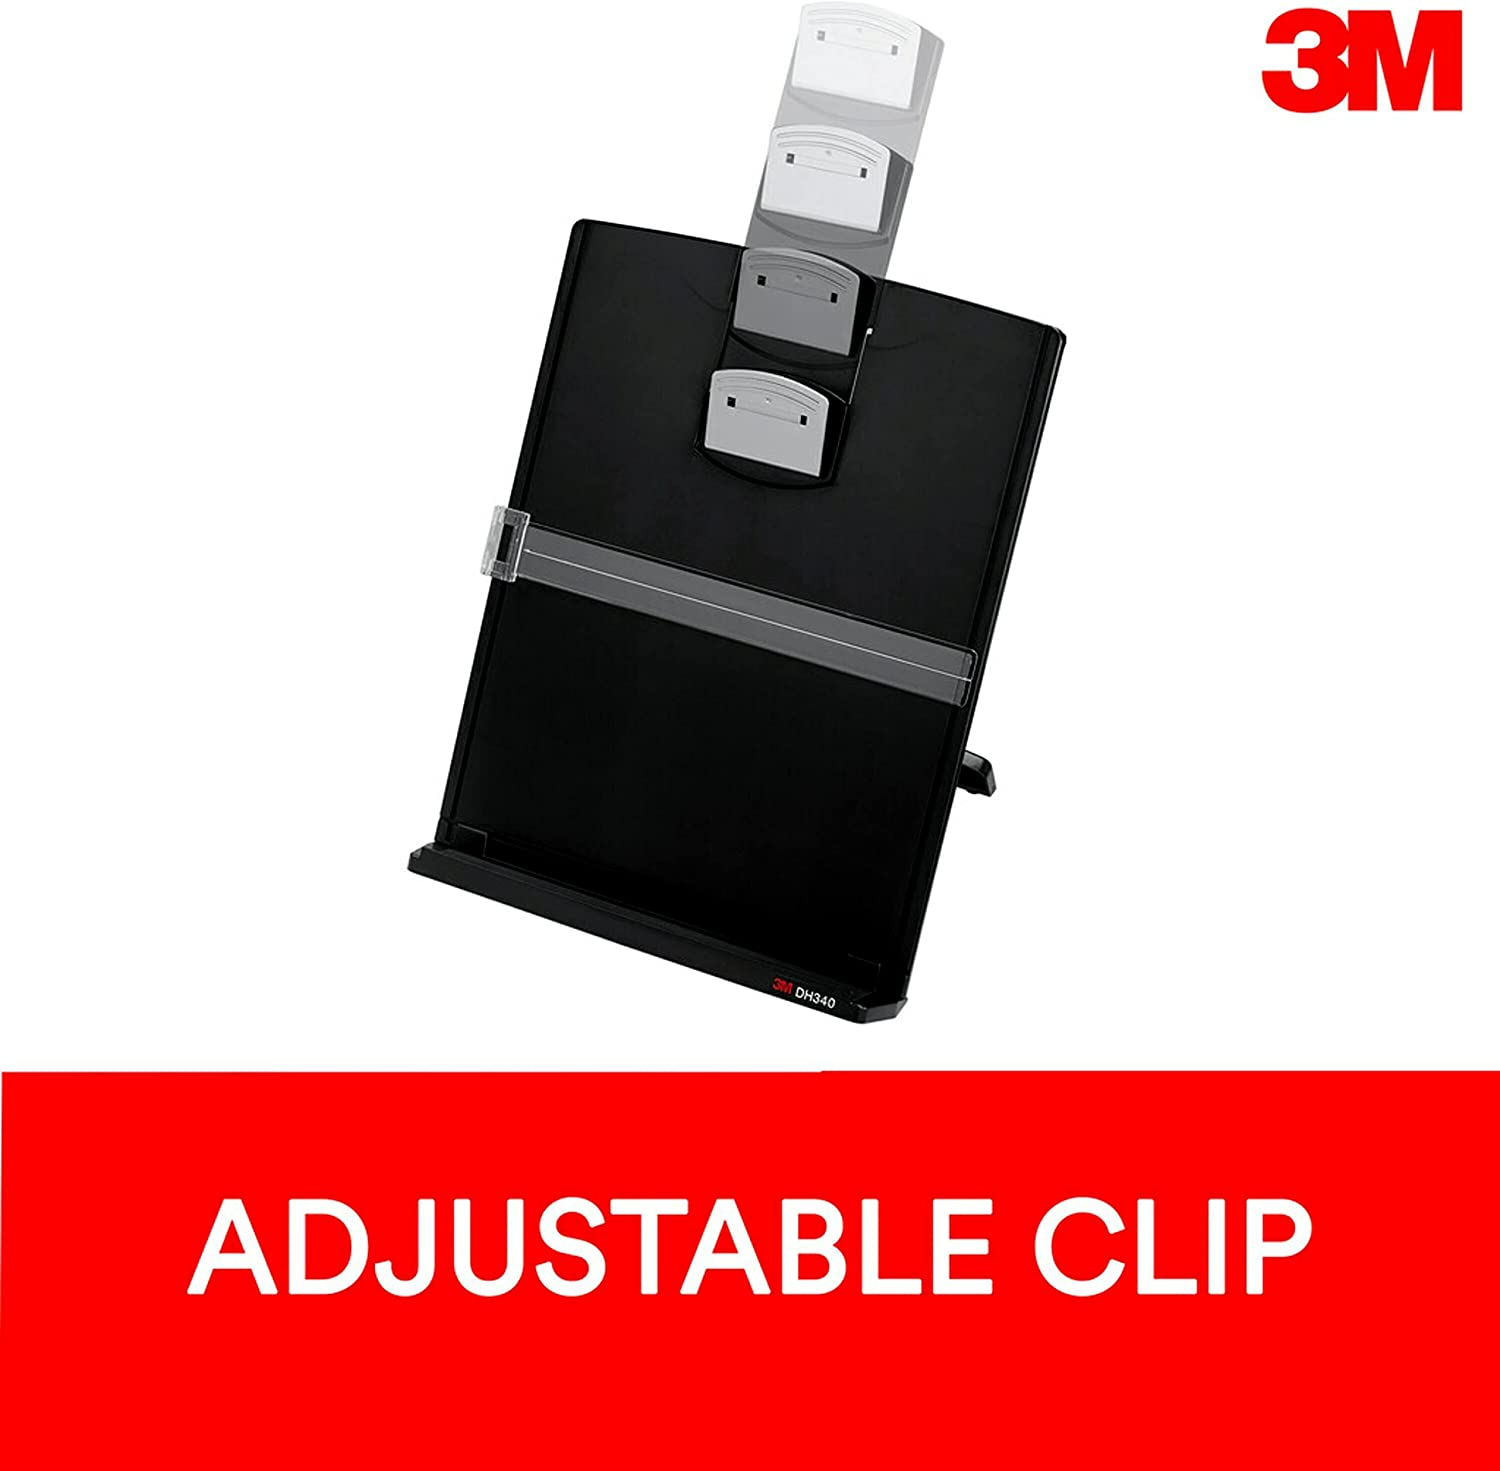 3M A4 Document Holder (DH340MB)